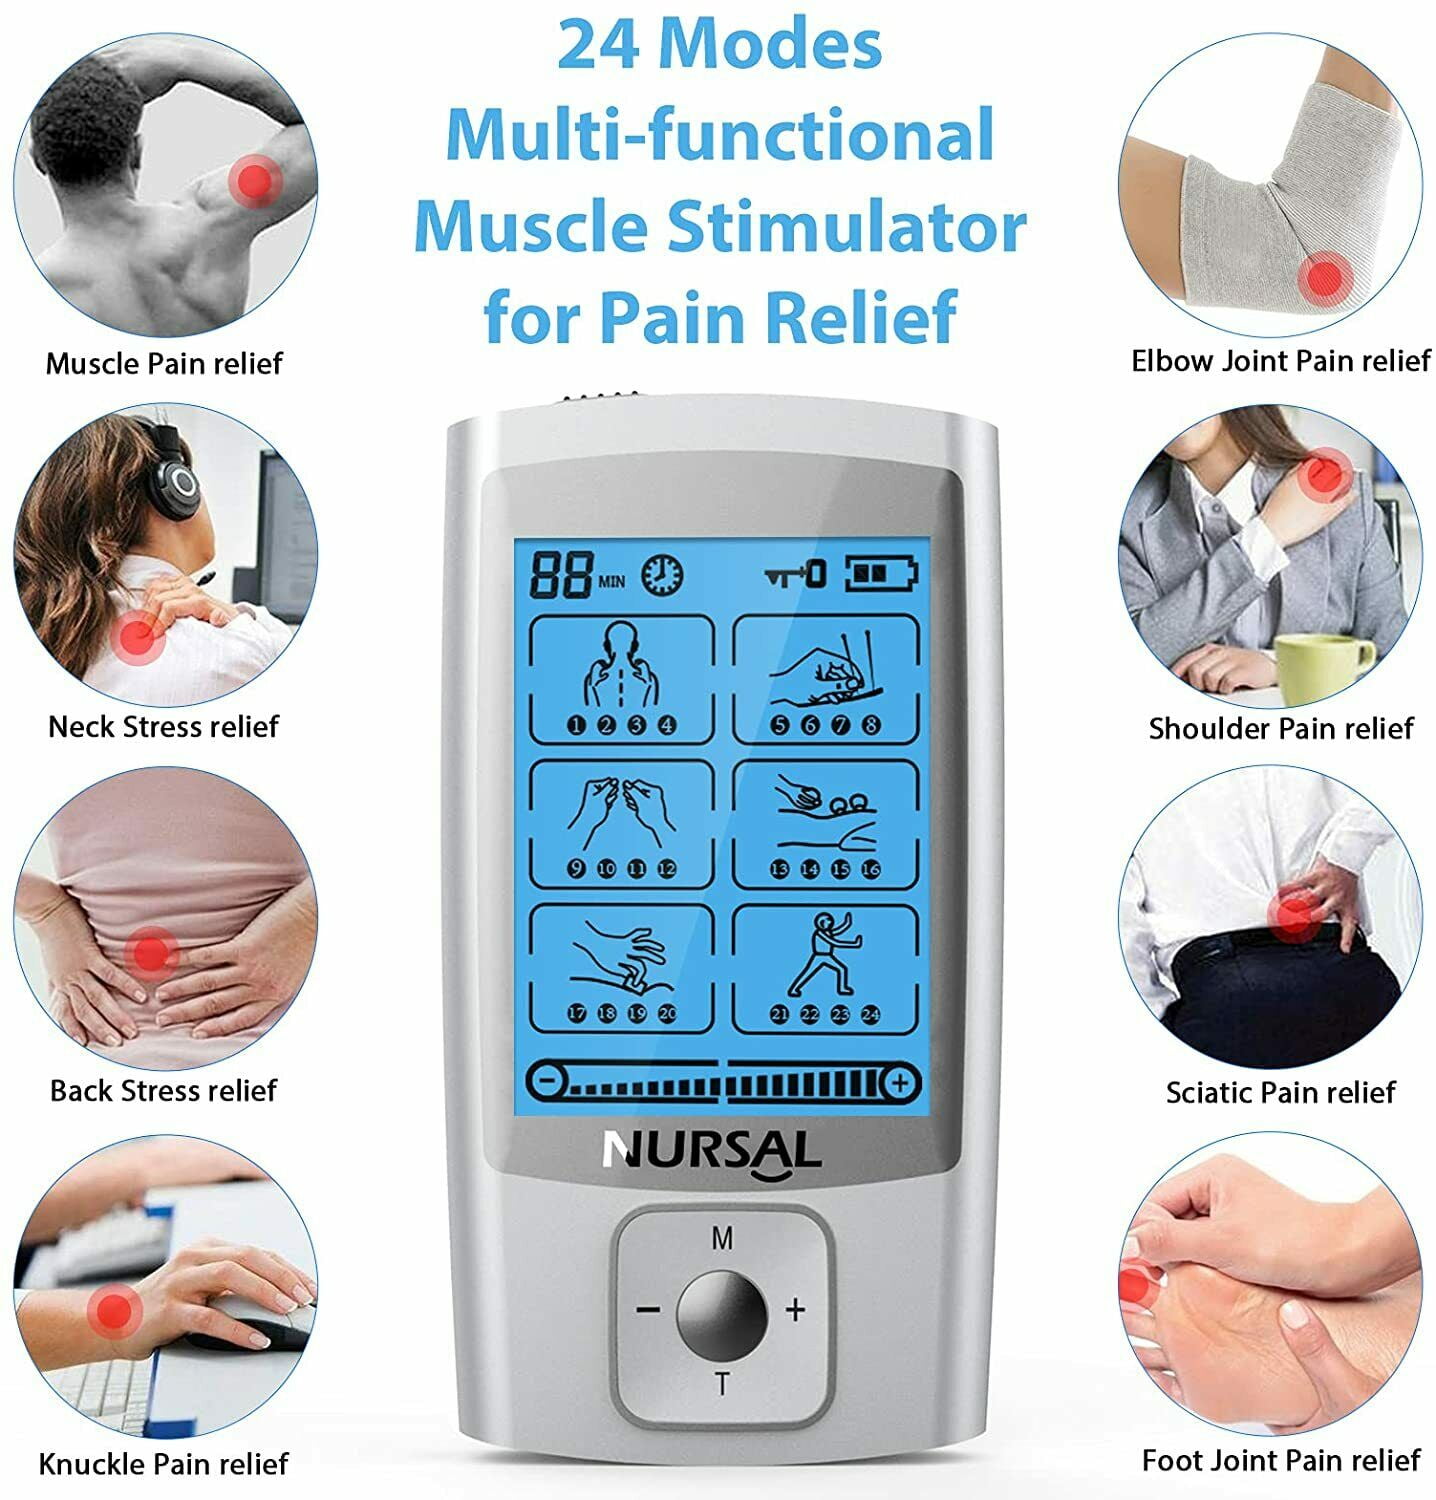  TENS Unit Muscle Stimulator for Pain Relief Therapy, NURSAL 24  Modes Dual Channels EMS TENS Machine, Rechargeable Electric Pulse Massager  Device with 8 Electrode Replacement Pads, 90minus Timer : Health & Household